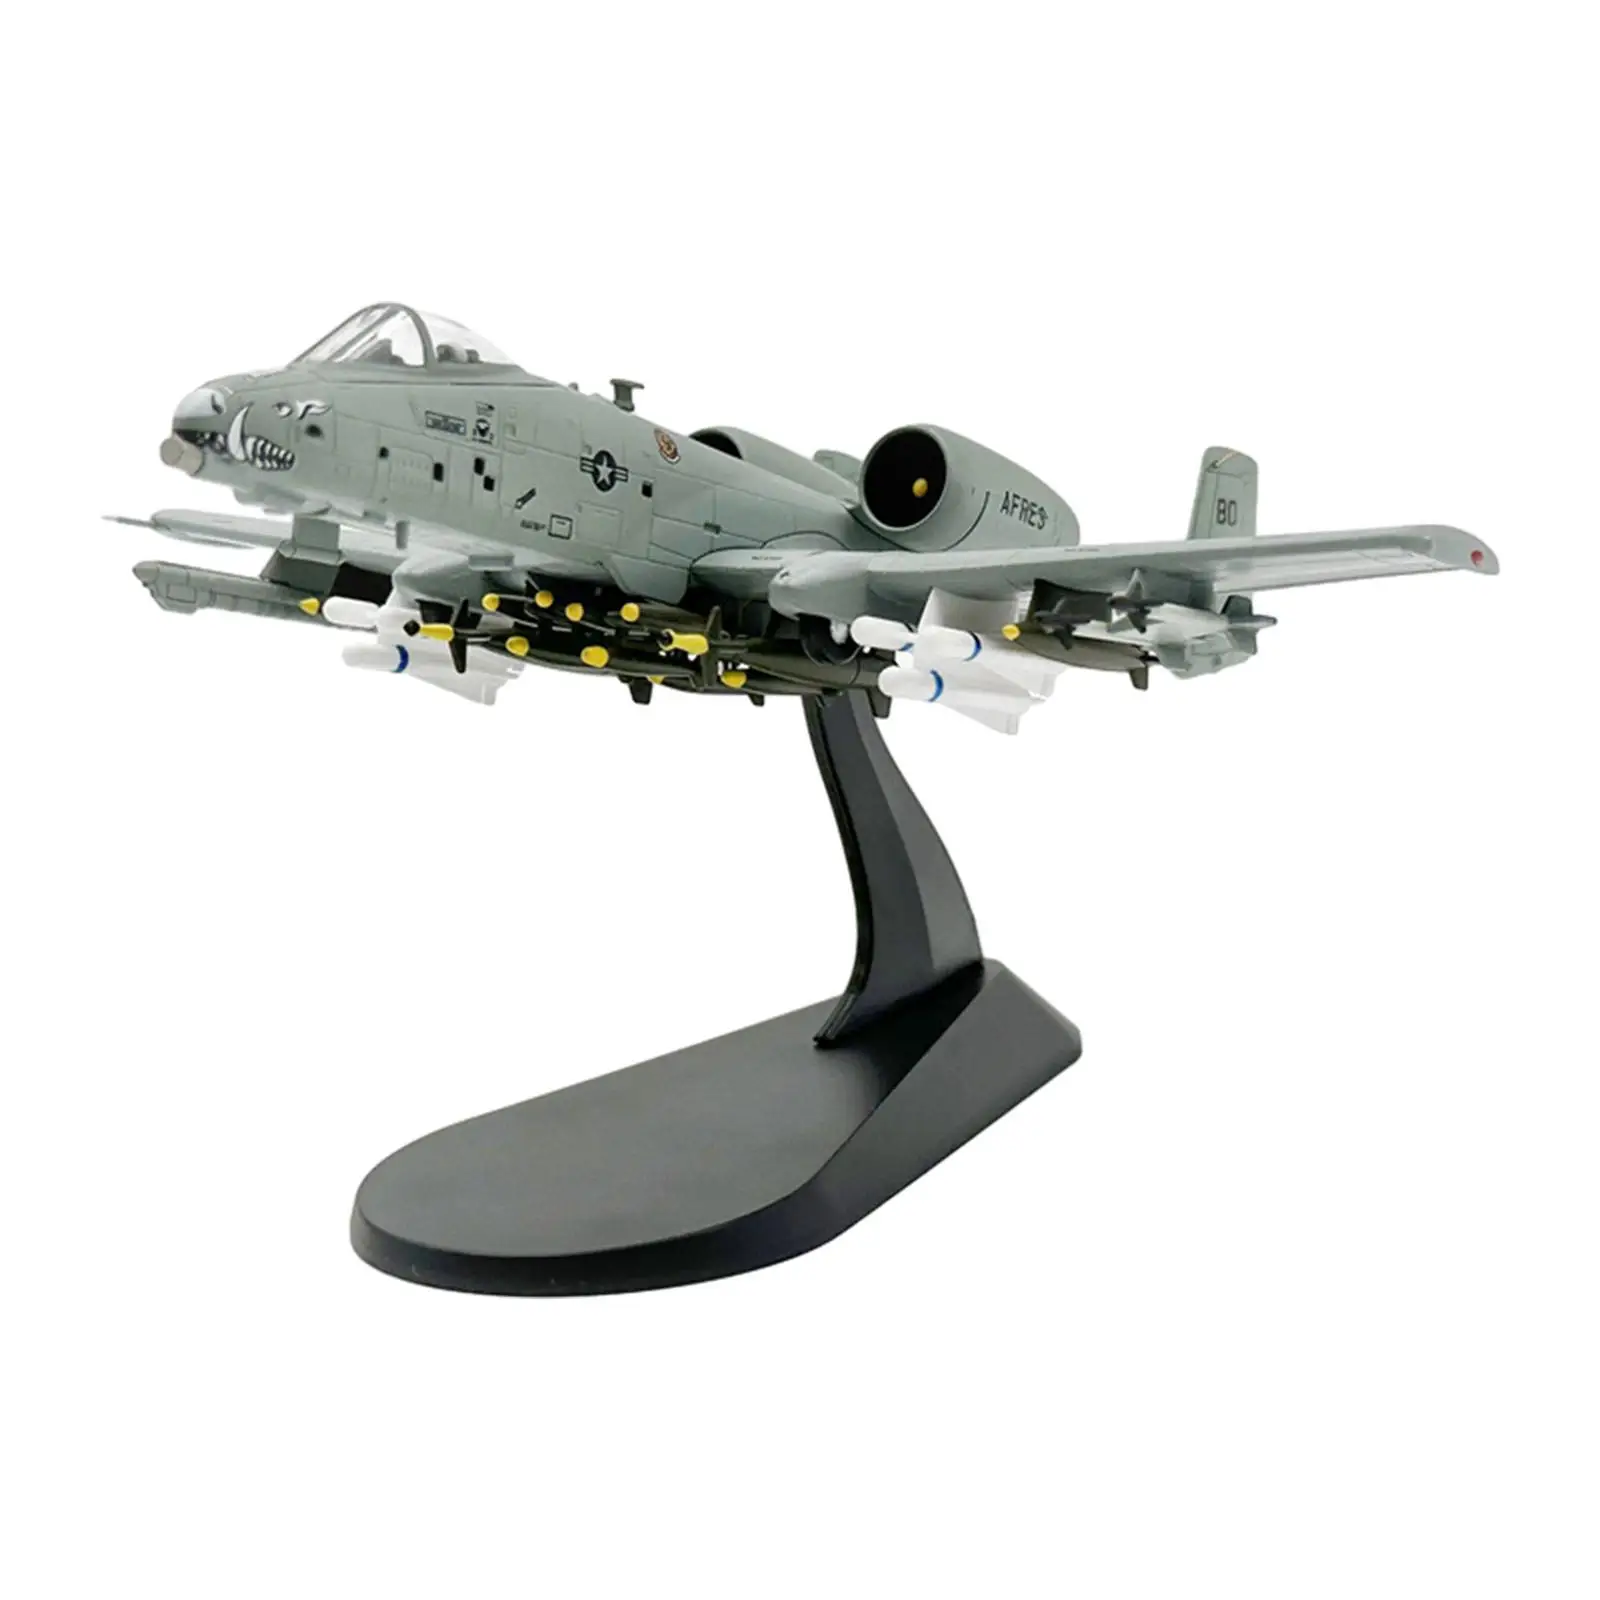 Diecast Plane Model 1:100 Scale Alloy Toy Diecast Collectibles Birthday Gift